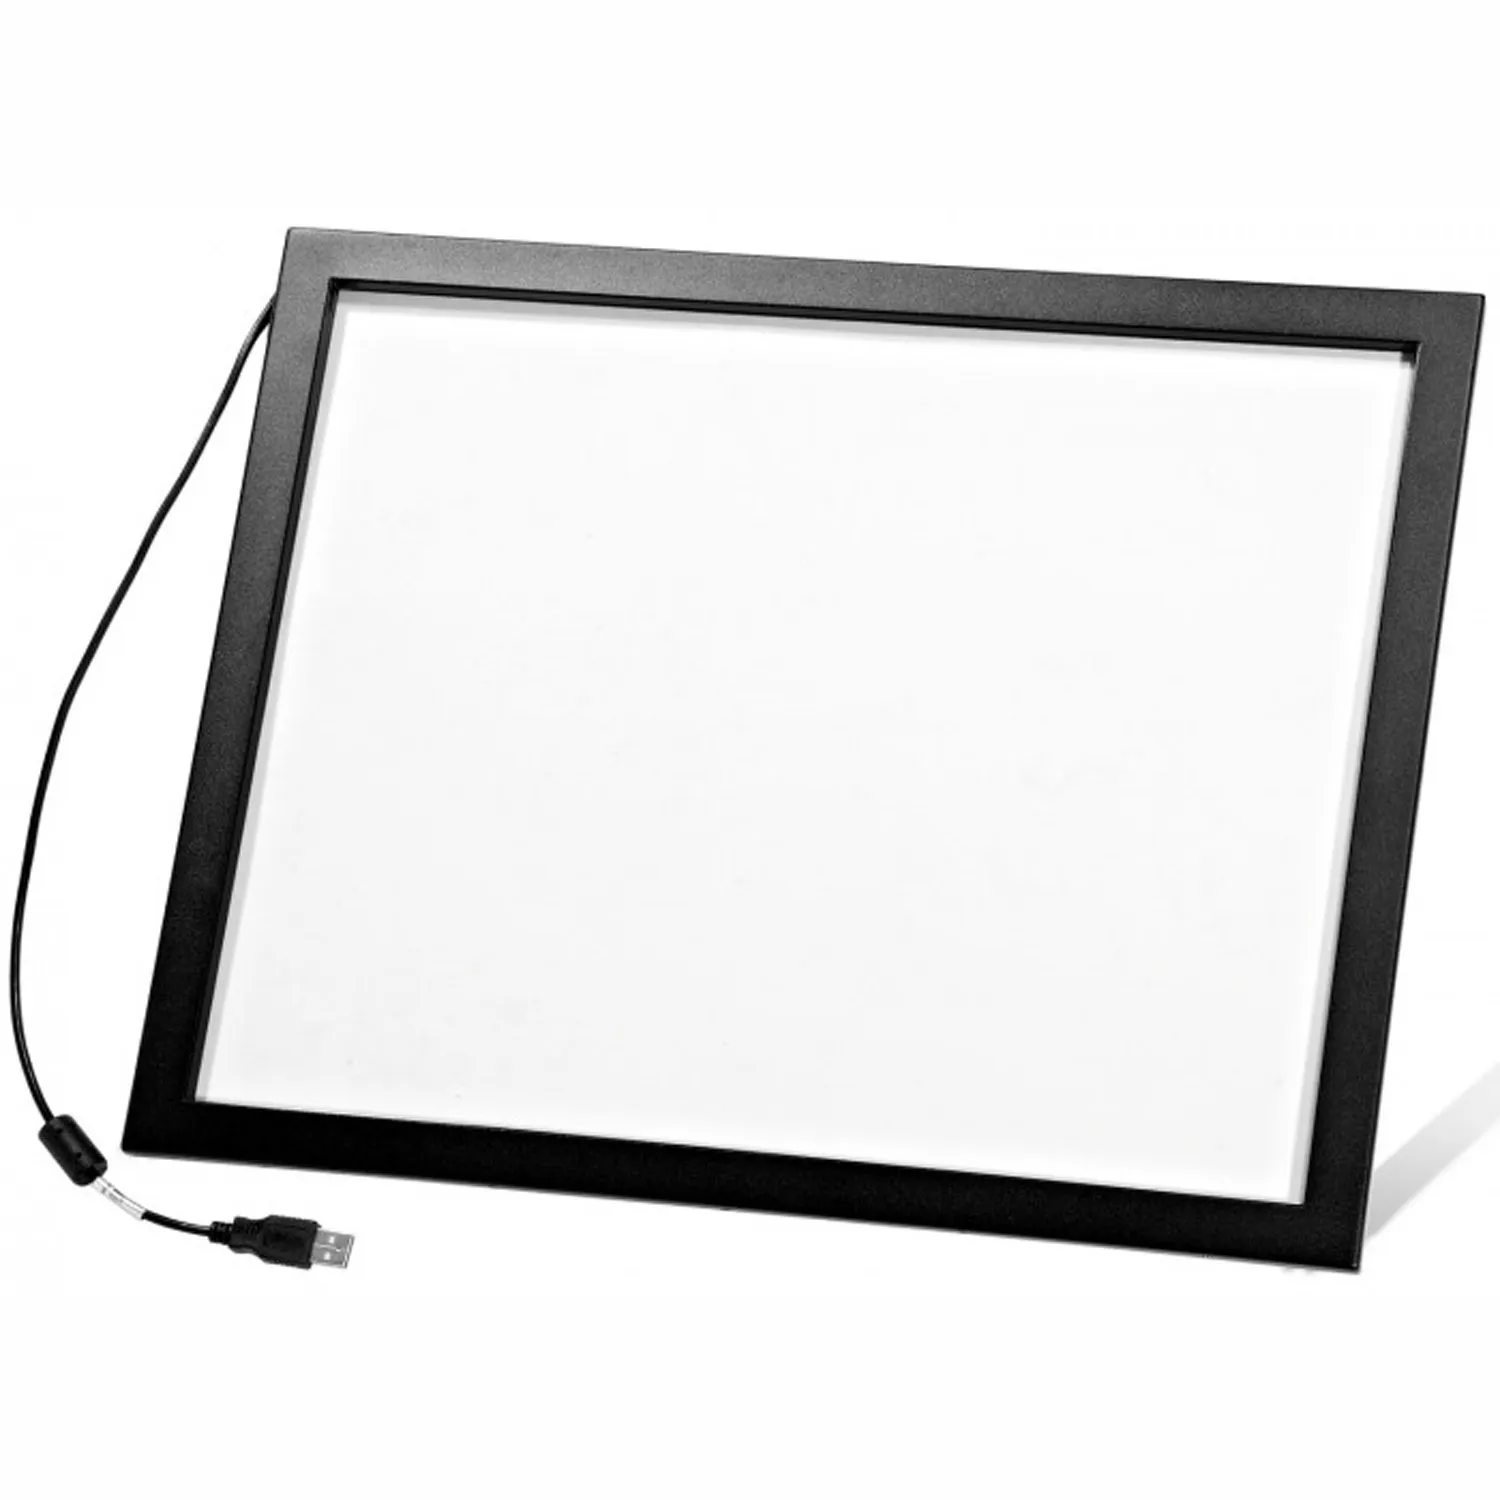 Touch Screen Keetouch GmbH 19" KP-190-IW1S0U2 frame with glass 